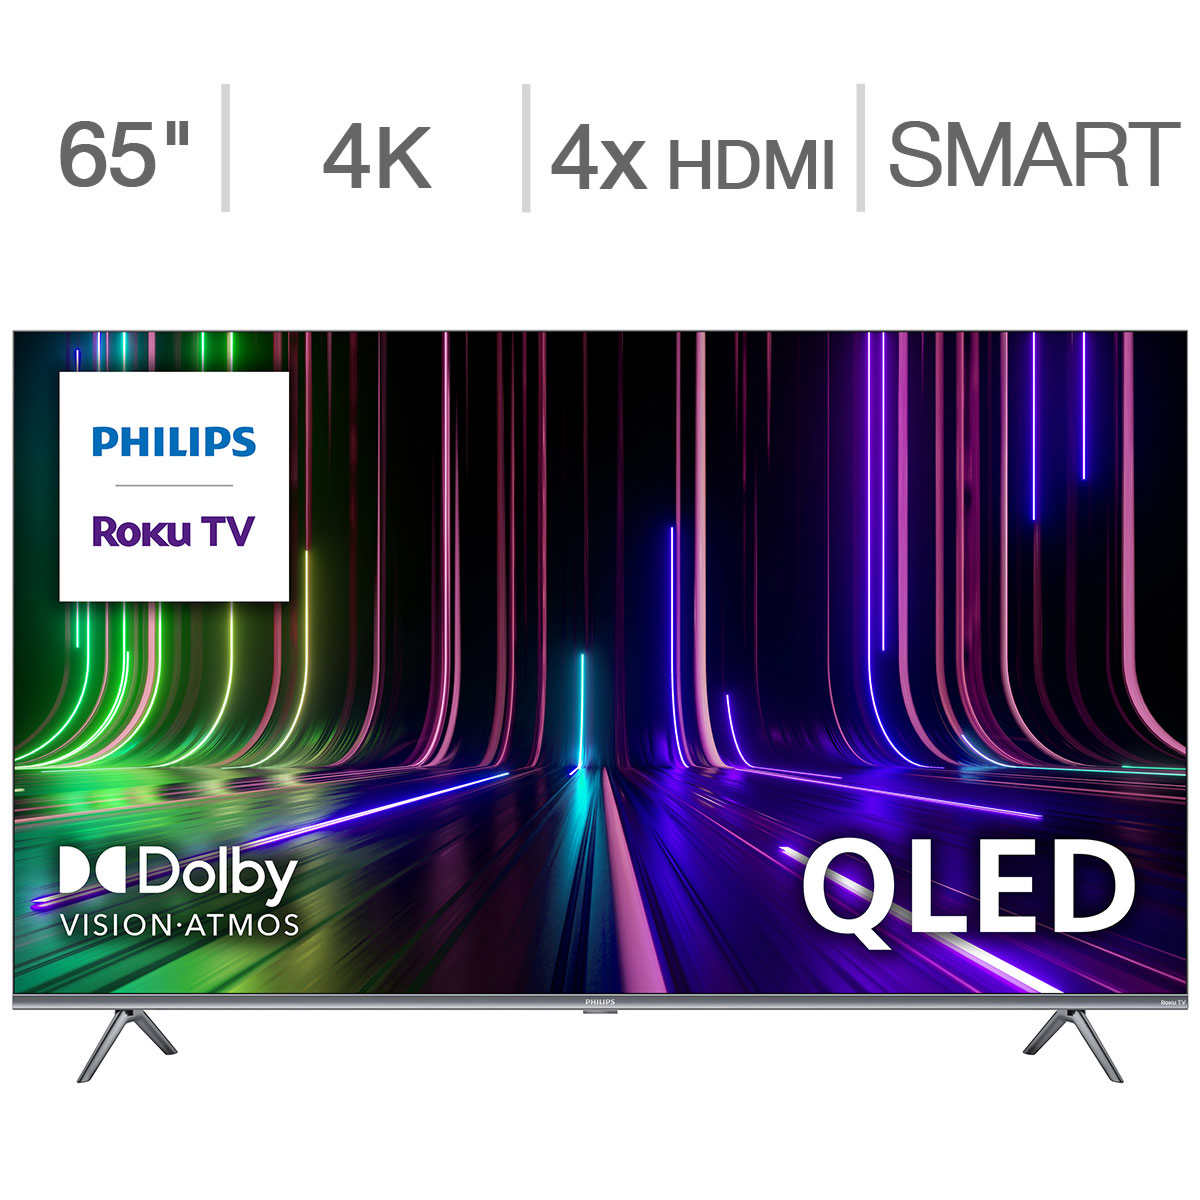 Samsung 65 Class - Q80C Series - 4K UHD QLED LCD TV - Allstate 3-Year  Protection Plan Bundle Included For 5 Years Of Total Coverage*